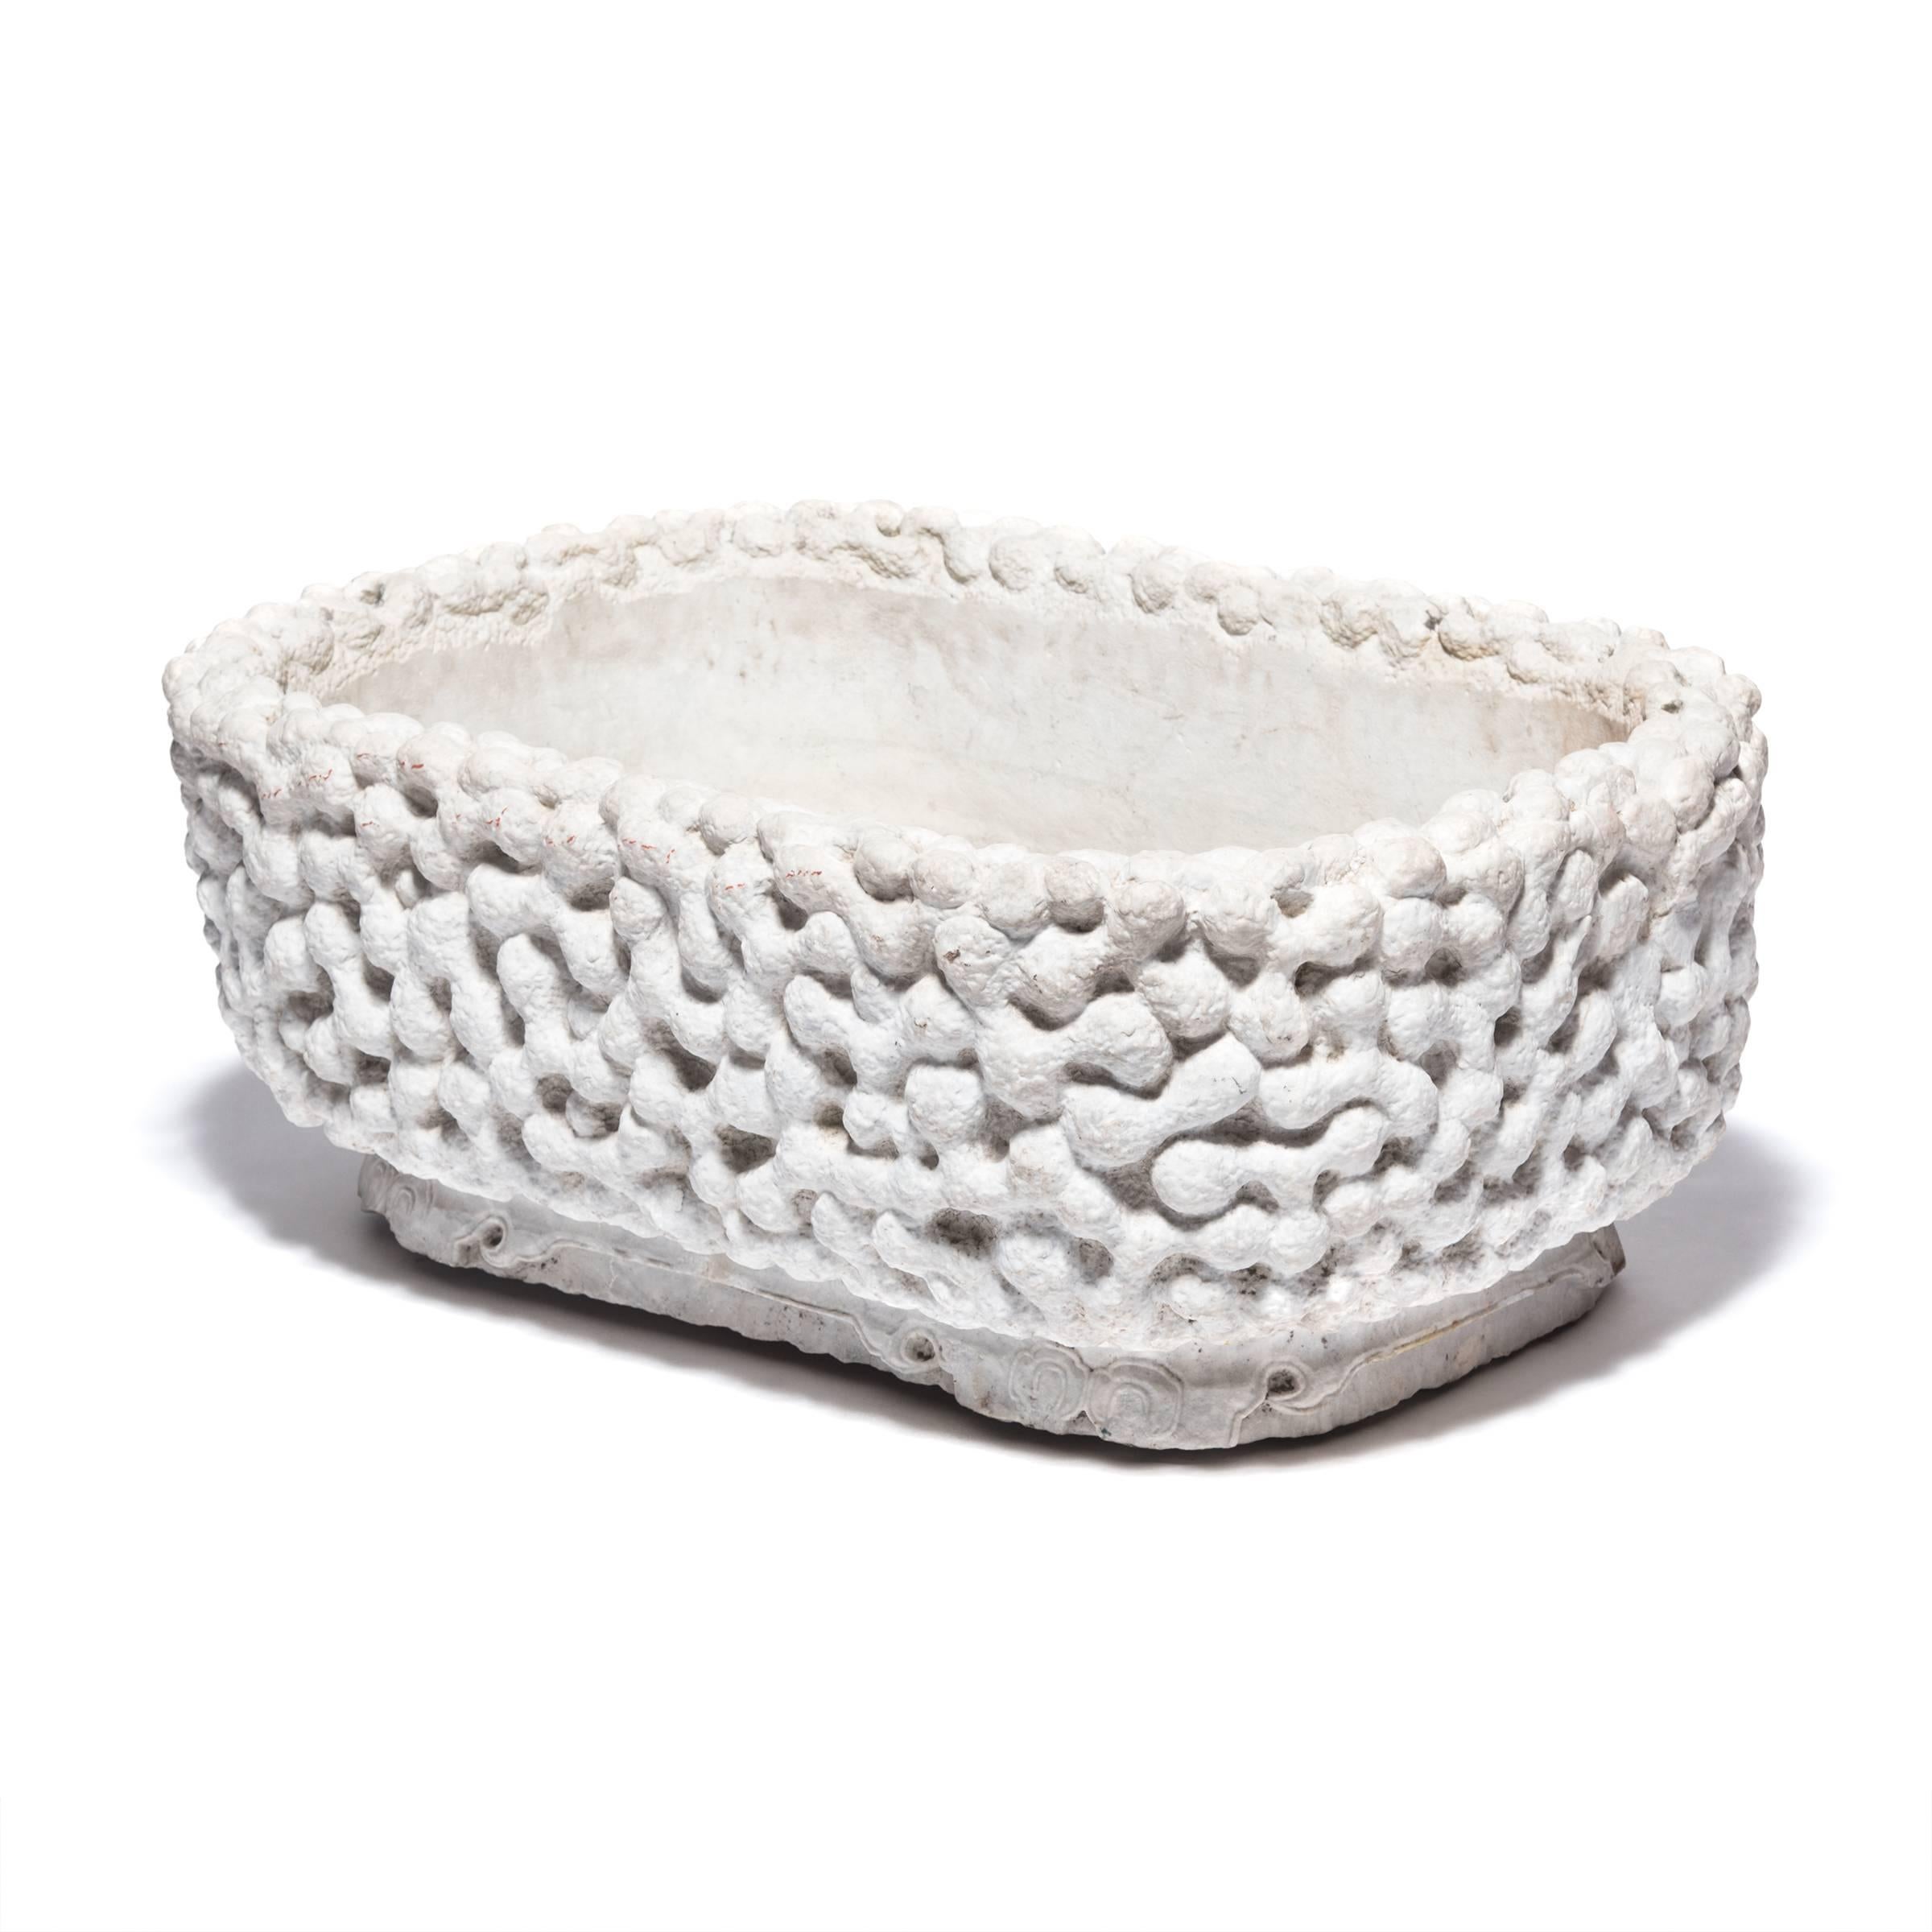 Like a Ming-dynasty scholars' sculptural root objects, this marble basin carved with a gnarled root pattern embraces Daoist affinities with nature and spontaneity. Hand-carved from a single block of white marble, the tub has a rectangular form with